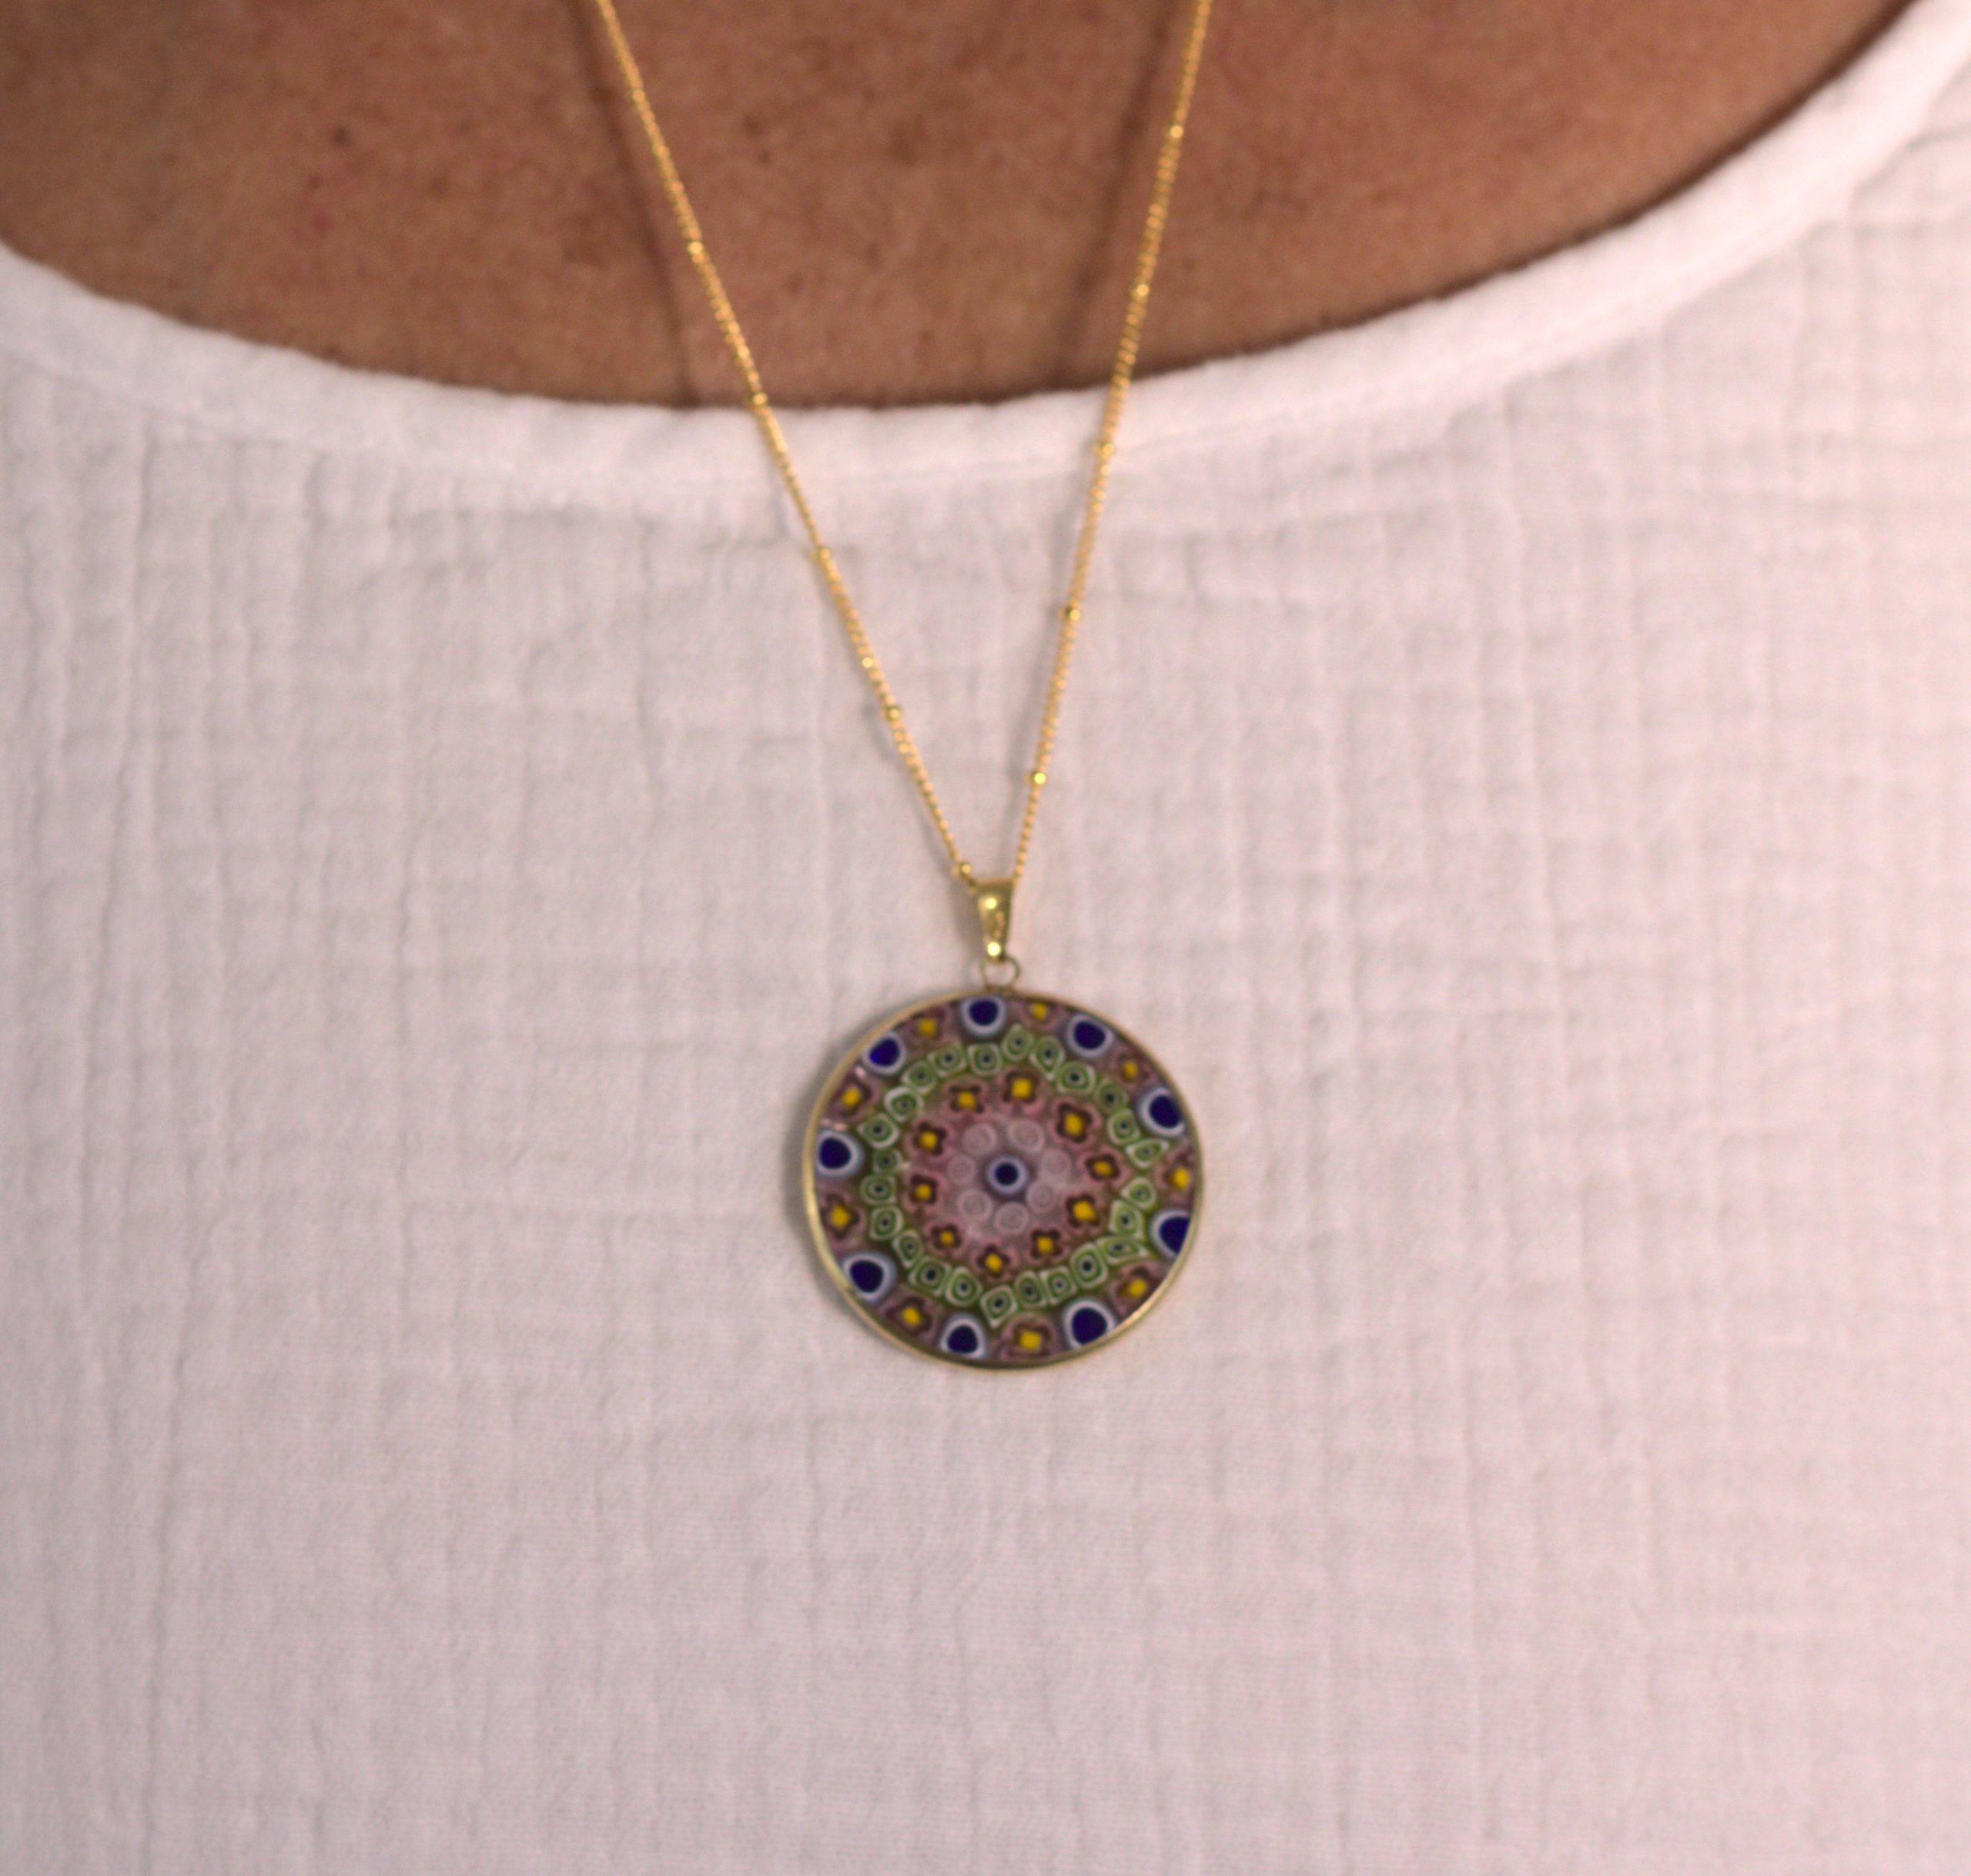 Millefiori in Earth tones and blue on model